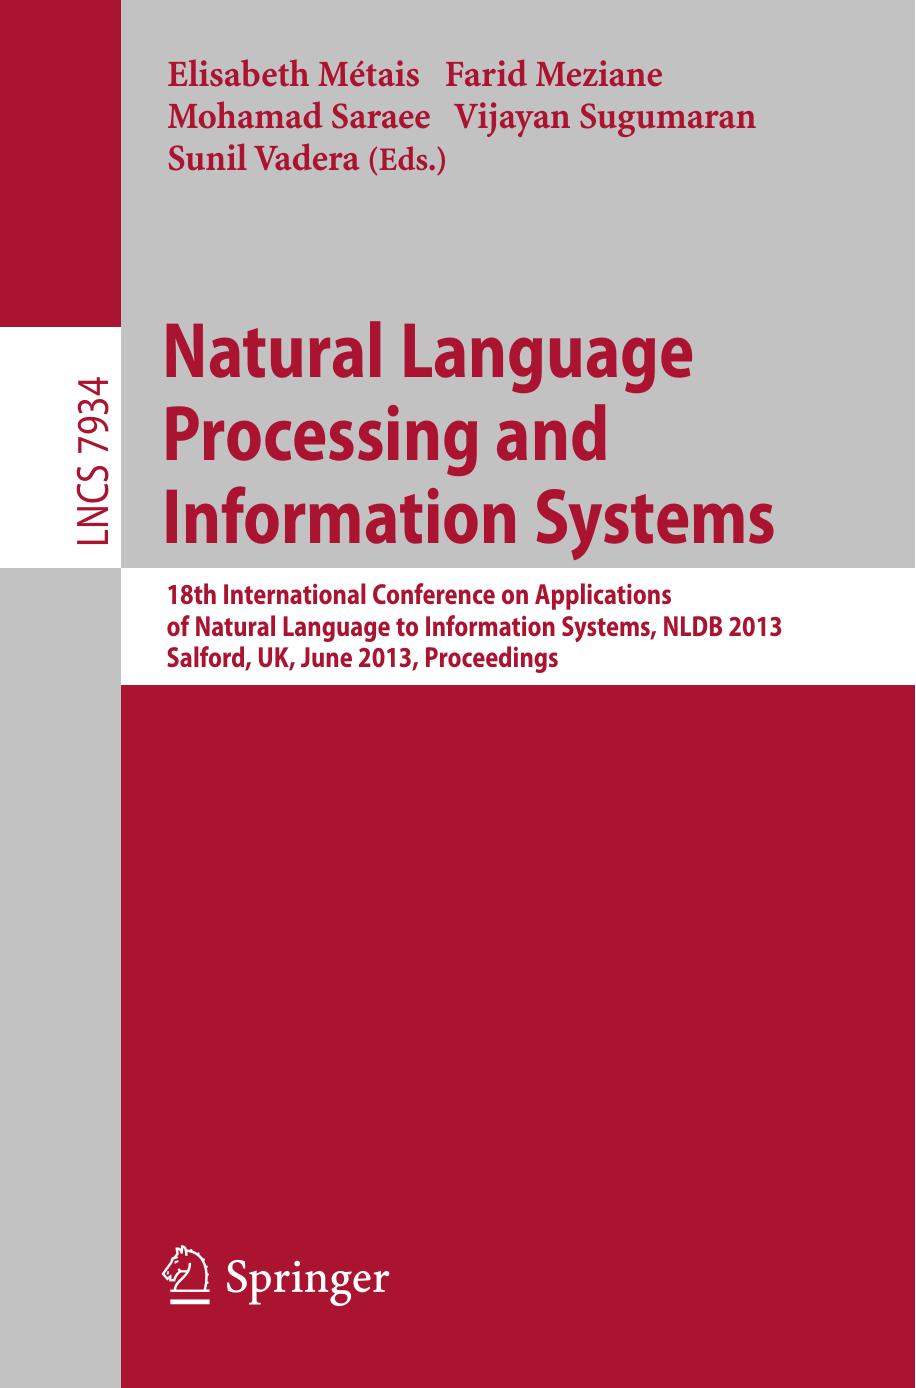 Natural Language Processing and Information Systems: 18th International Conference on Applications of Natural Language to Information Systems, NLDB 2013, Salford, UK, Proceedings